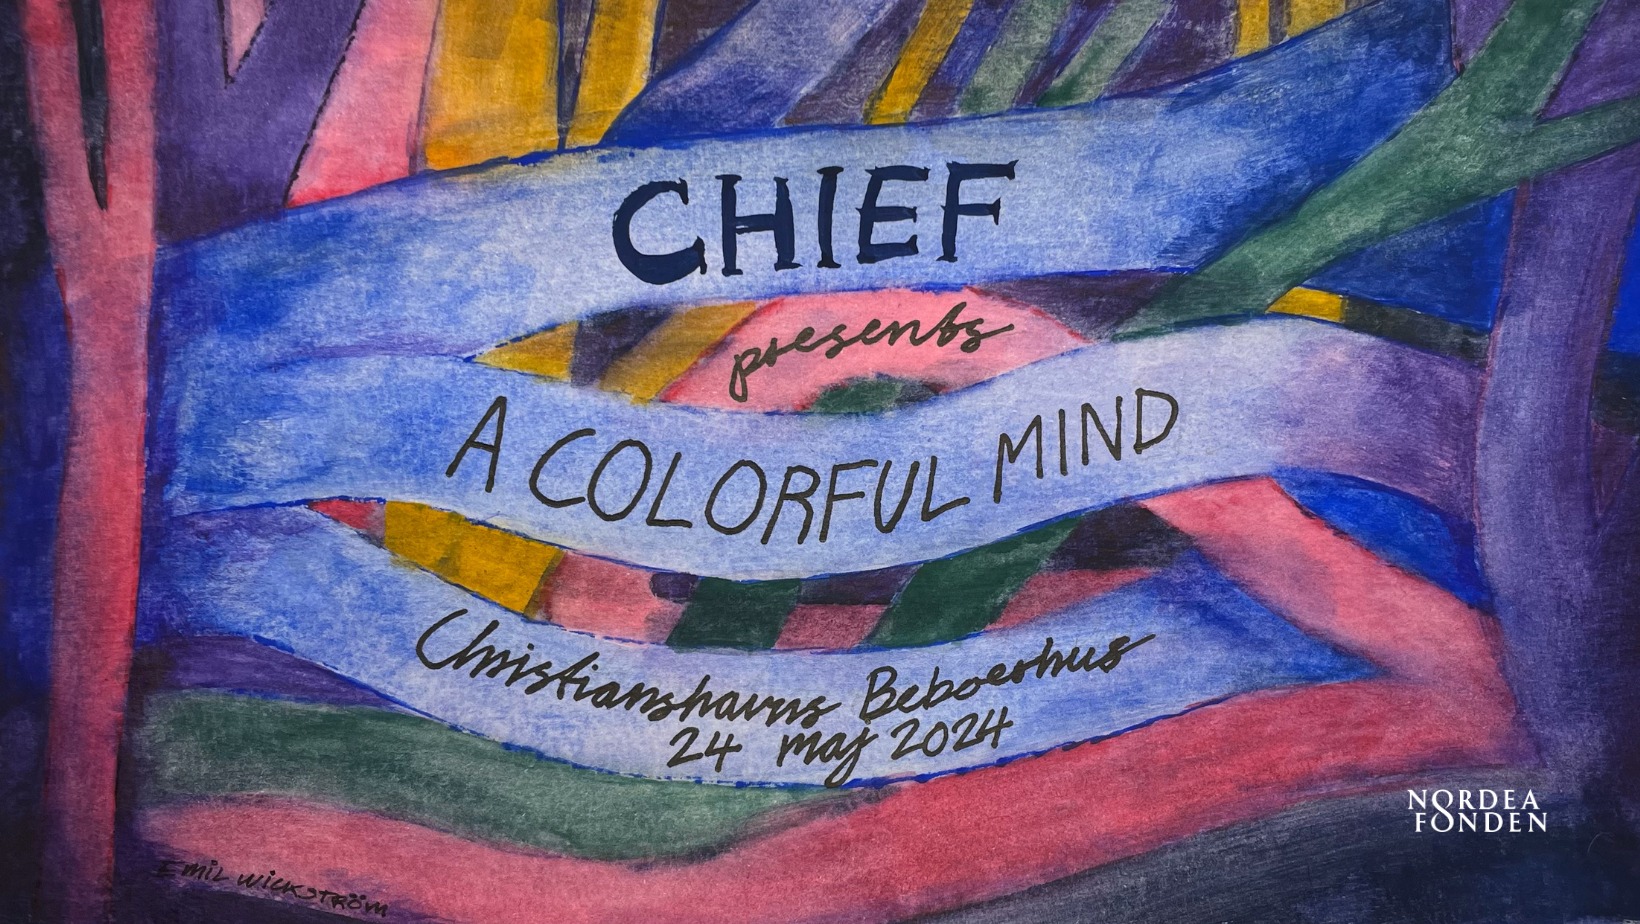 CHIEF presents “COLORFUL MIND” Album Release Party